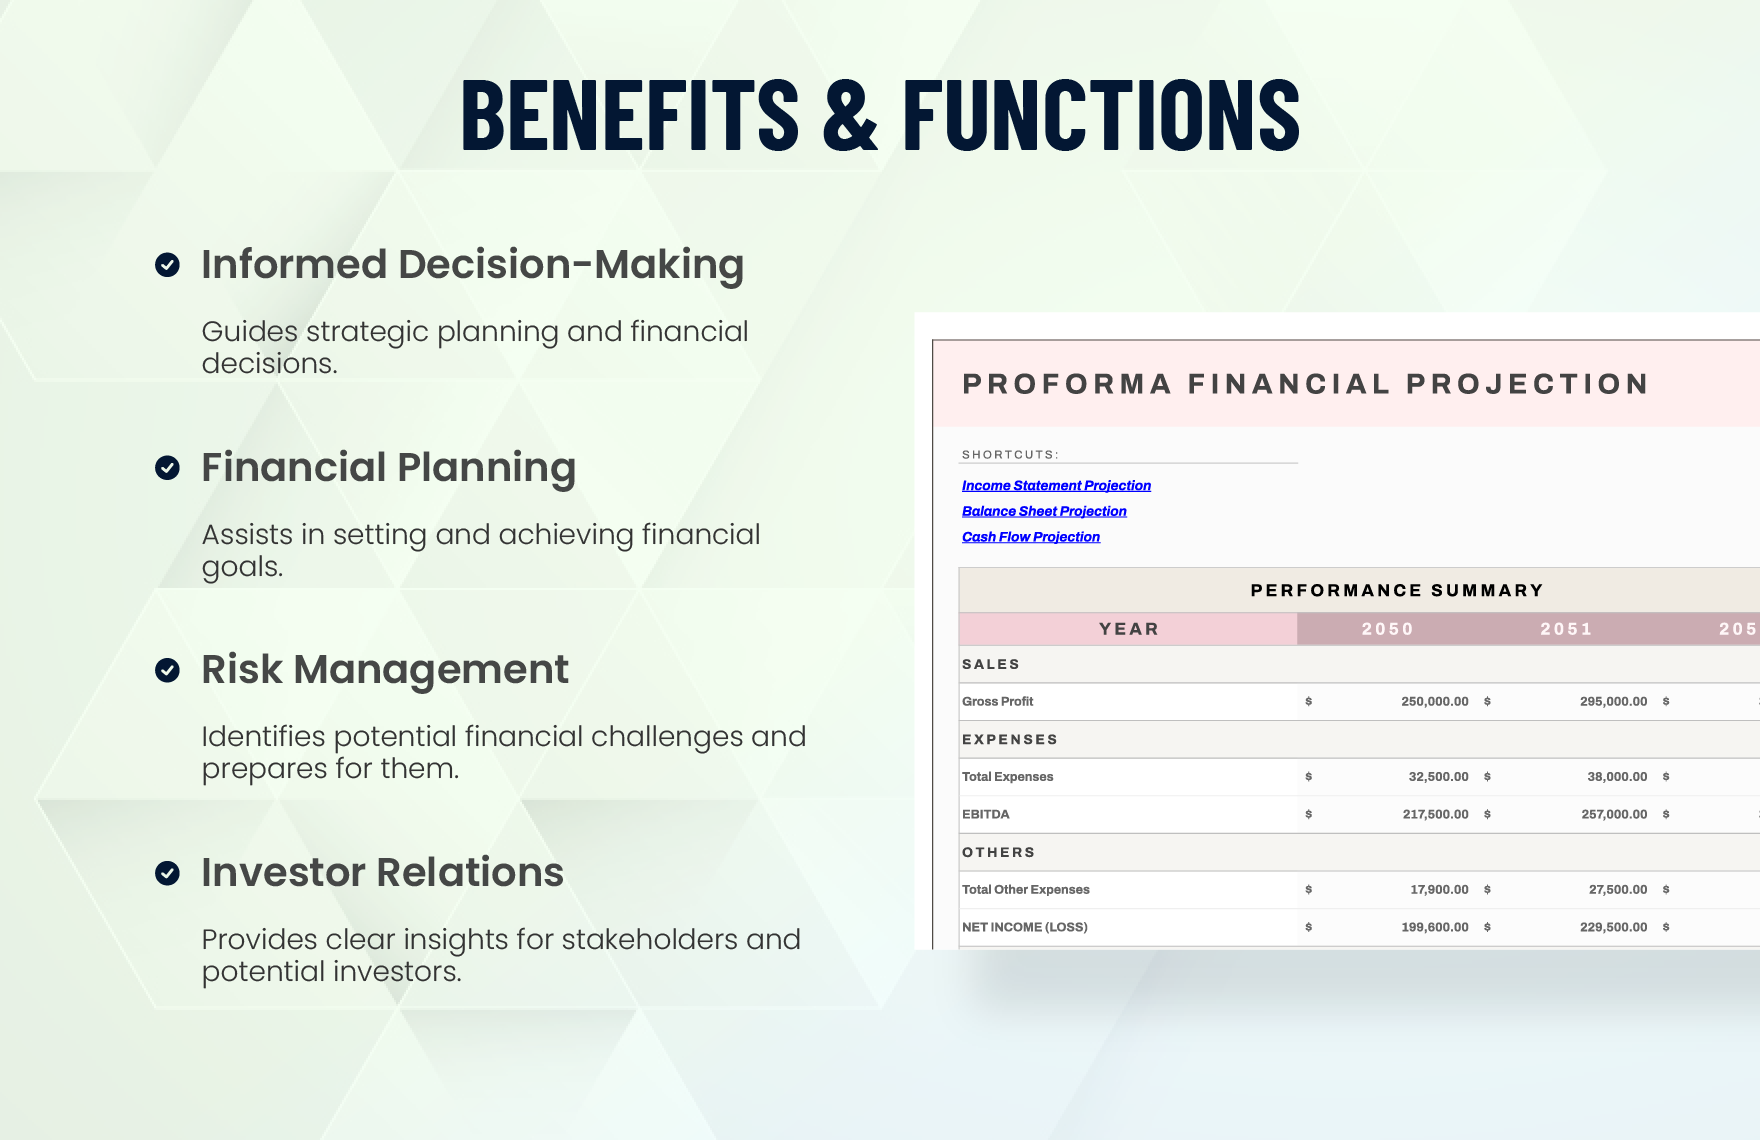 Proforma Financial Projection Template